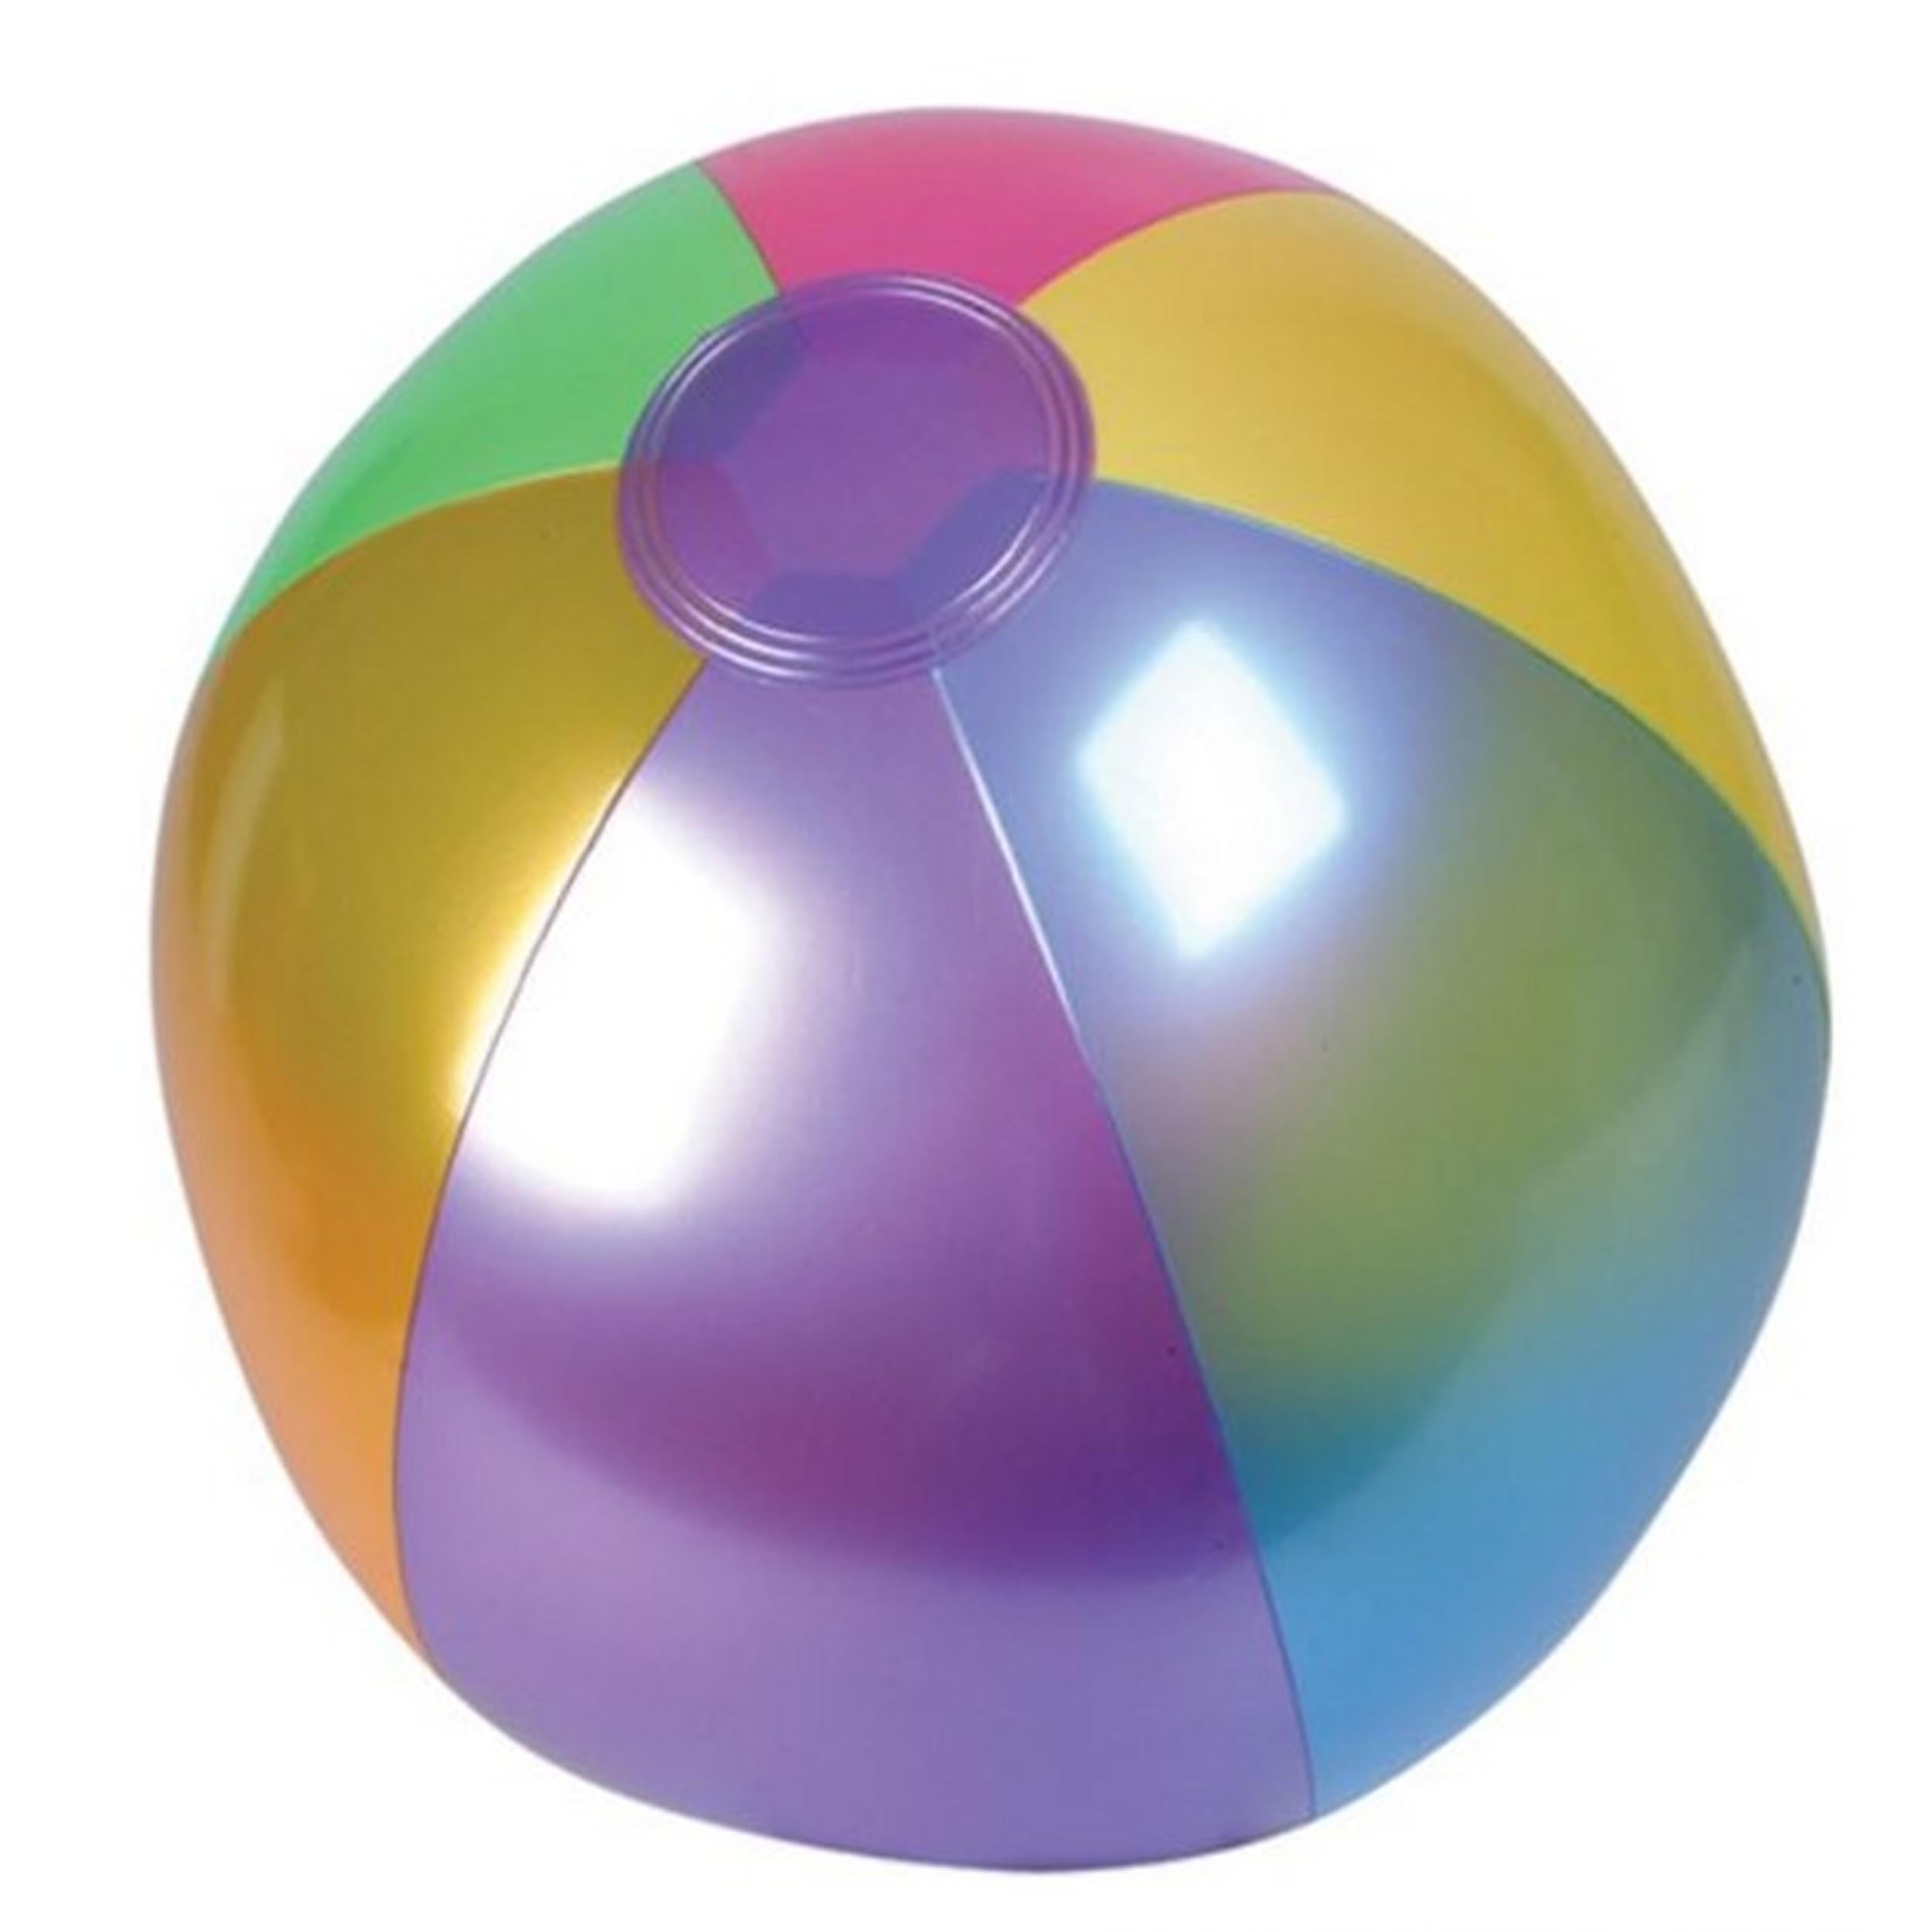 18" Metallic Beach Ball Fun Outdoor Toy for Seaside and Poolside Activities Assorted Colors (MOQ-12)